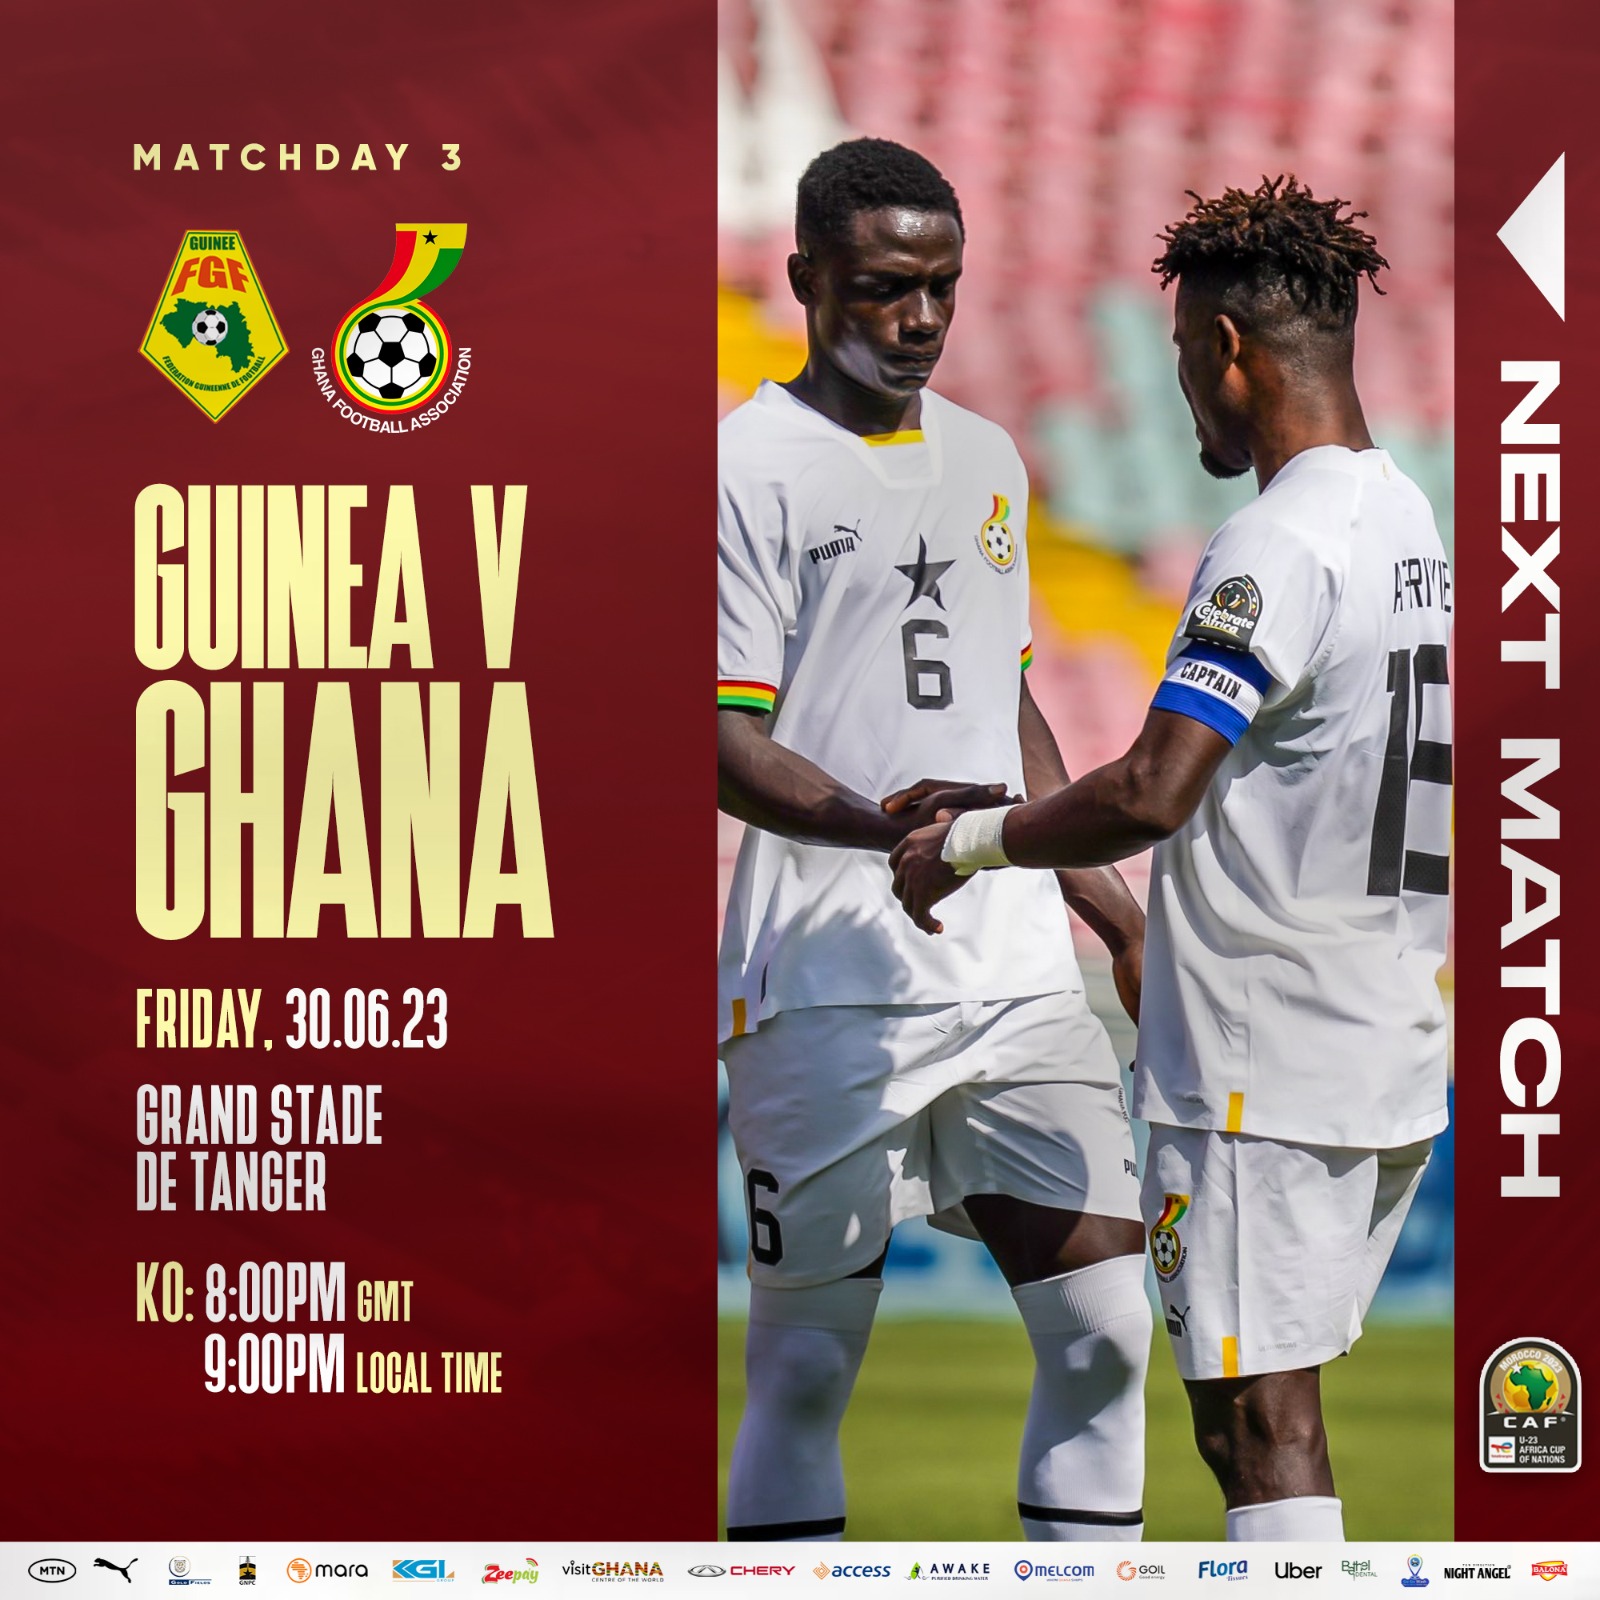 Introducing The W88 Bookie - Ghana Latest Football News, Live Scores,  Results - GHANAsoccernet